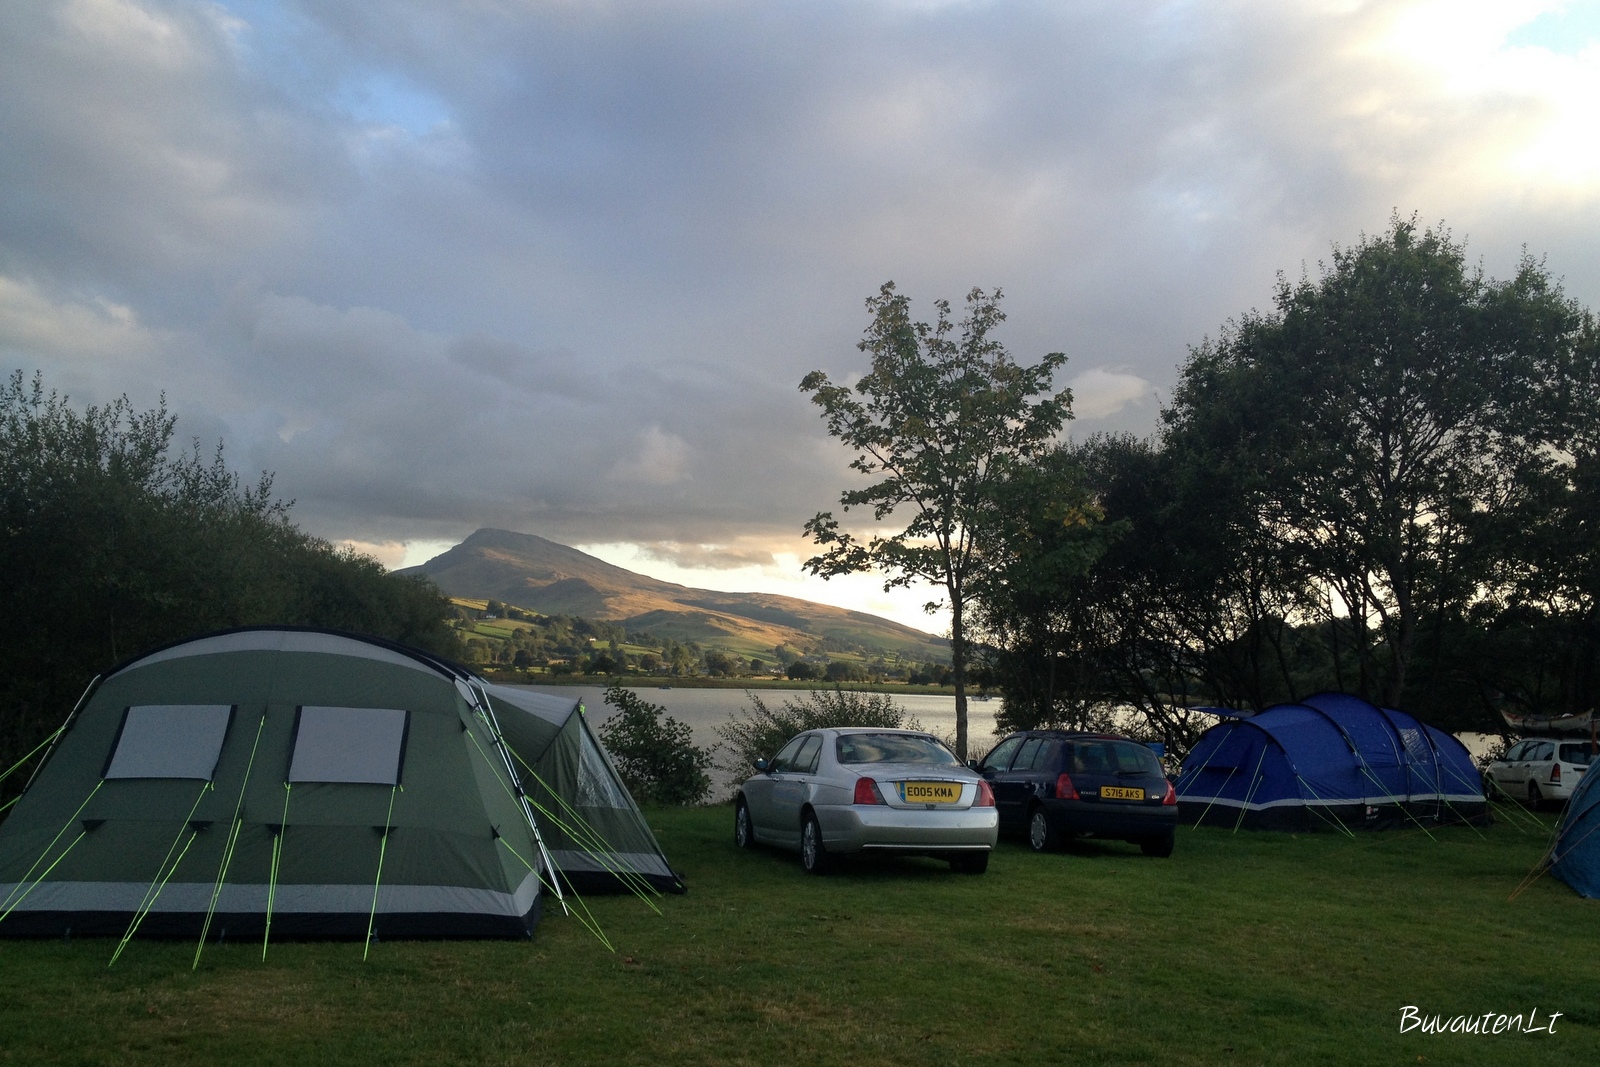 Camping in Snowdonia